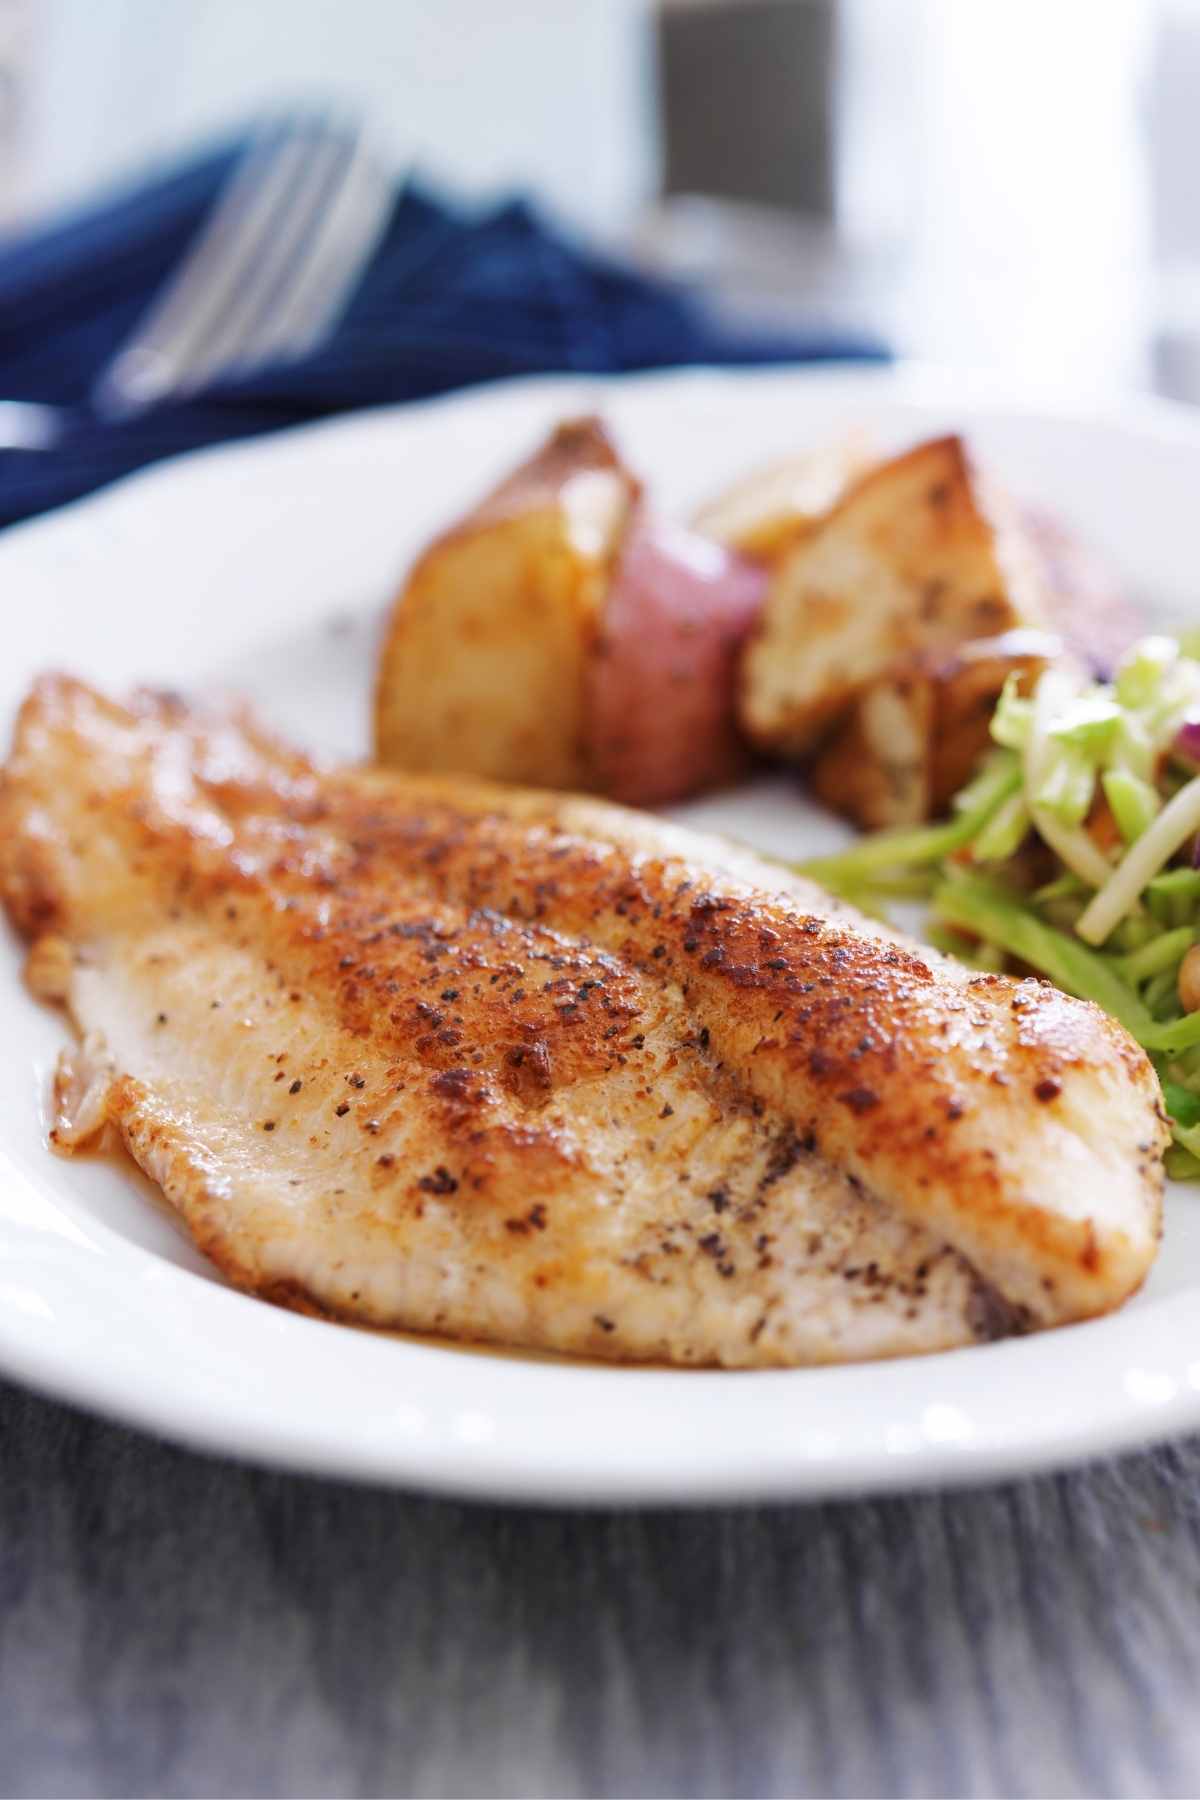 This Baked Catfish features a tasty seasoning blend that perfectly complements the mild and slightly sweet flavor of the fish.